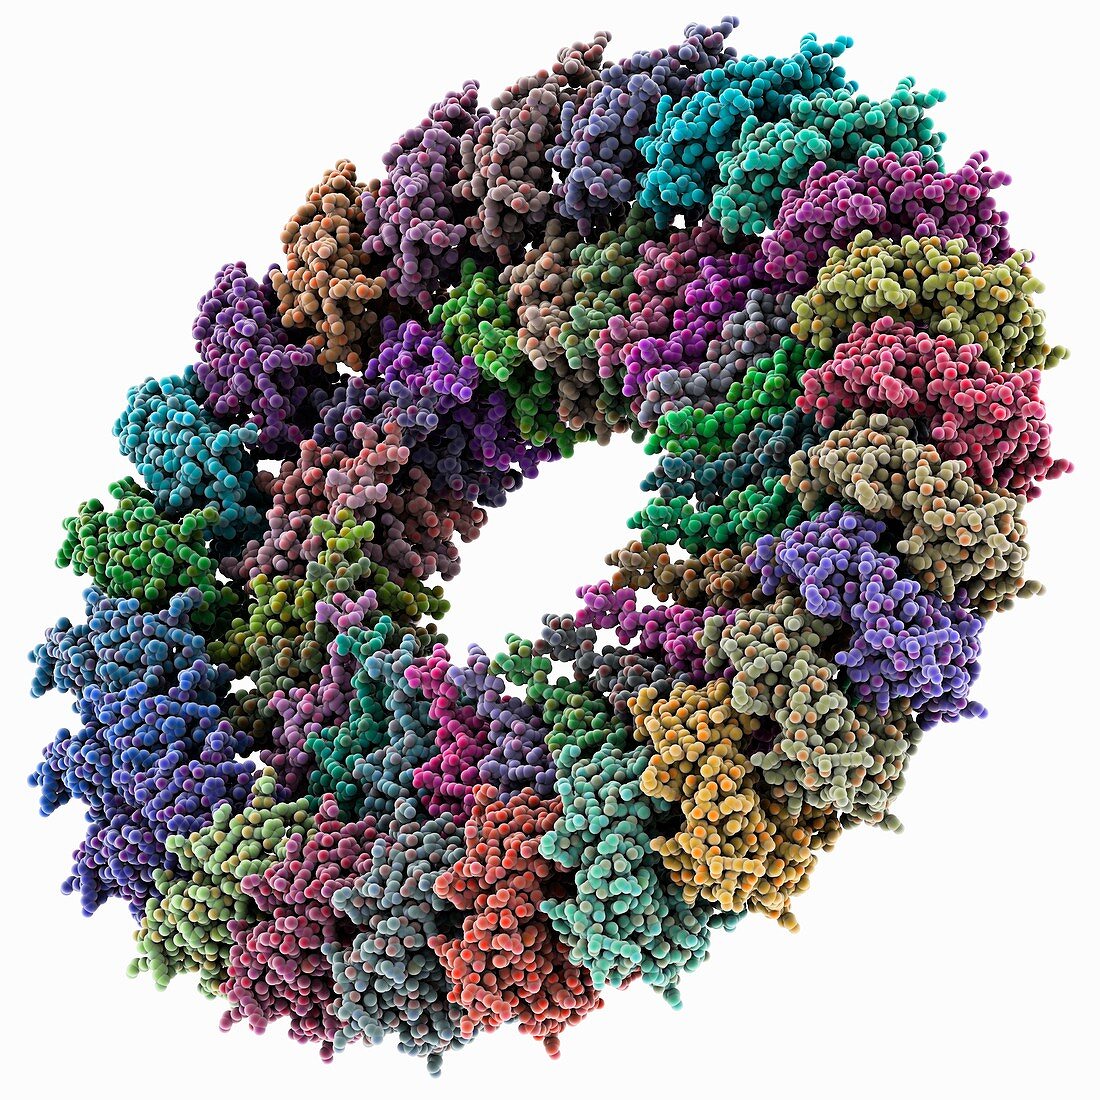 Bacterial needle complex protein rings